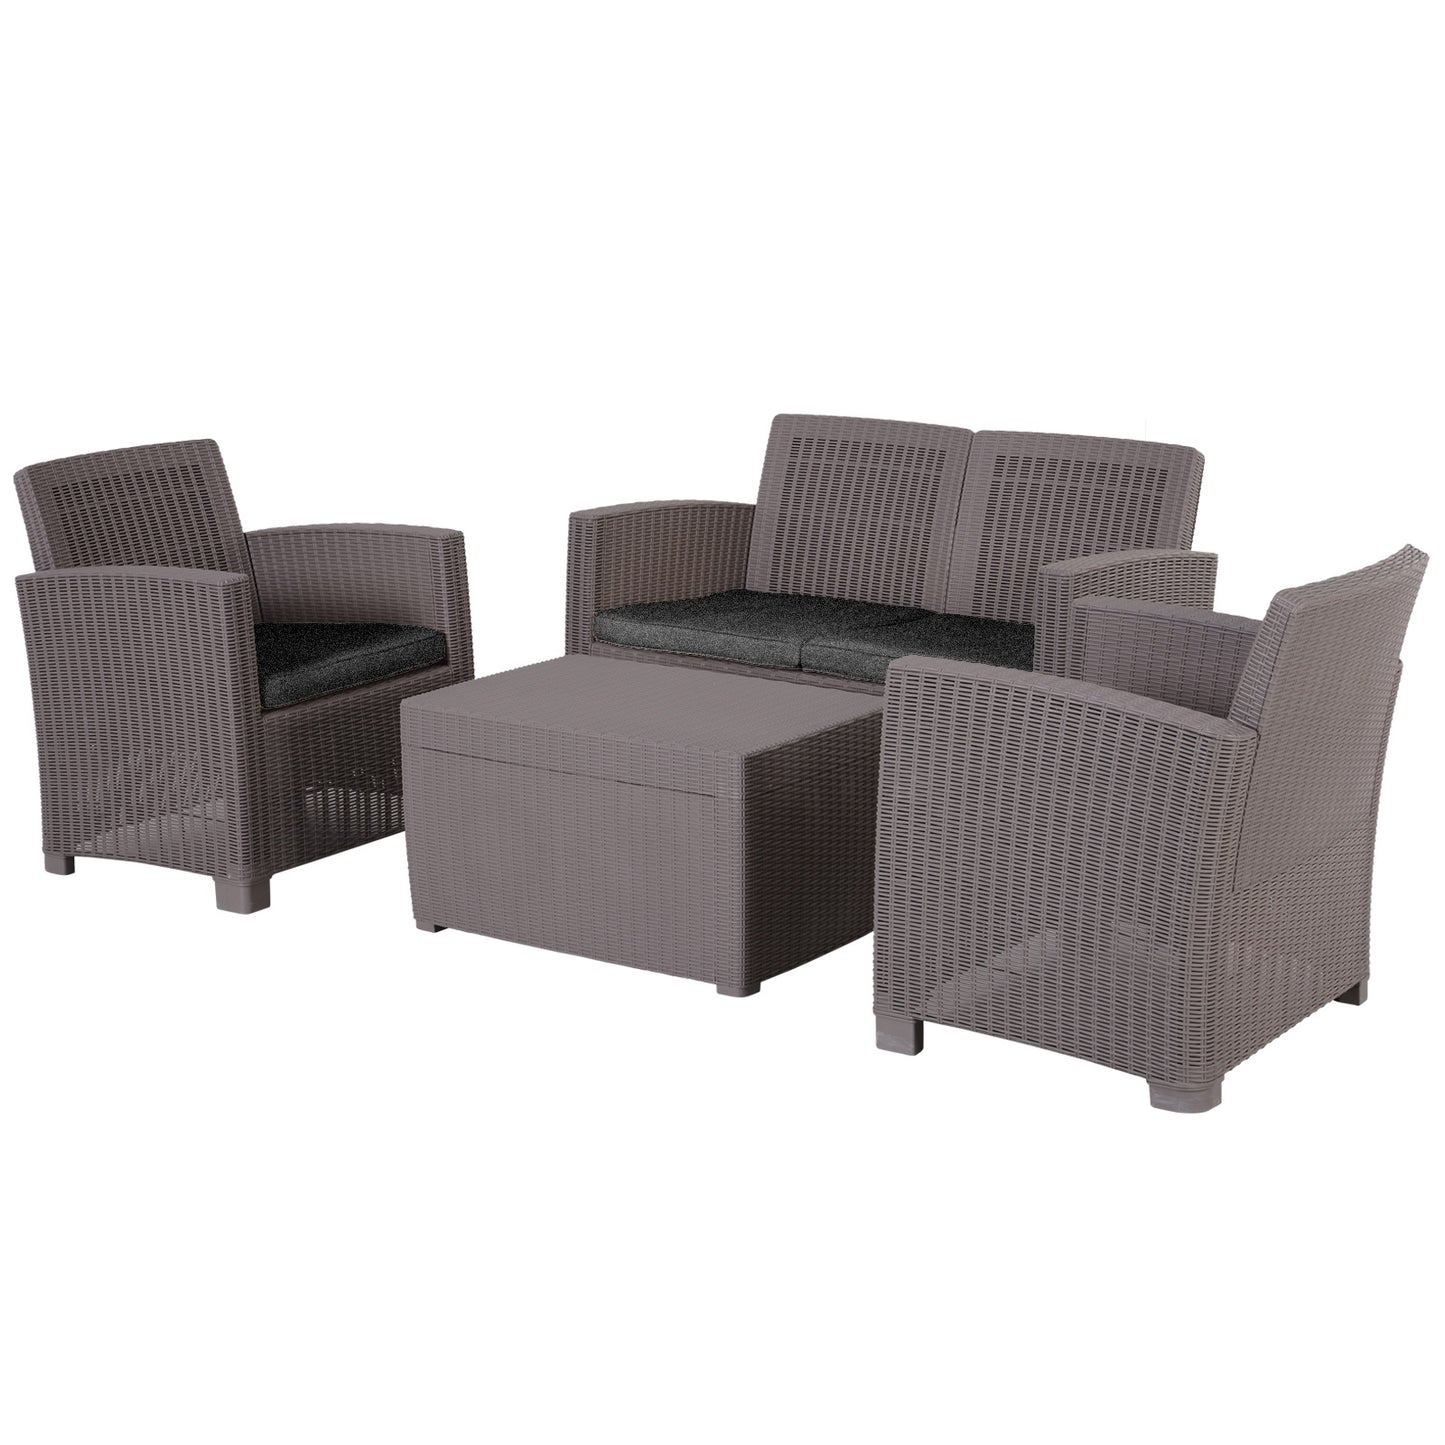 Outsunny 4-Seater Outdoor Garden PP Rattan Effect Furniture Set w/ Cushion Grey